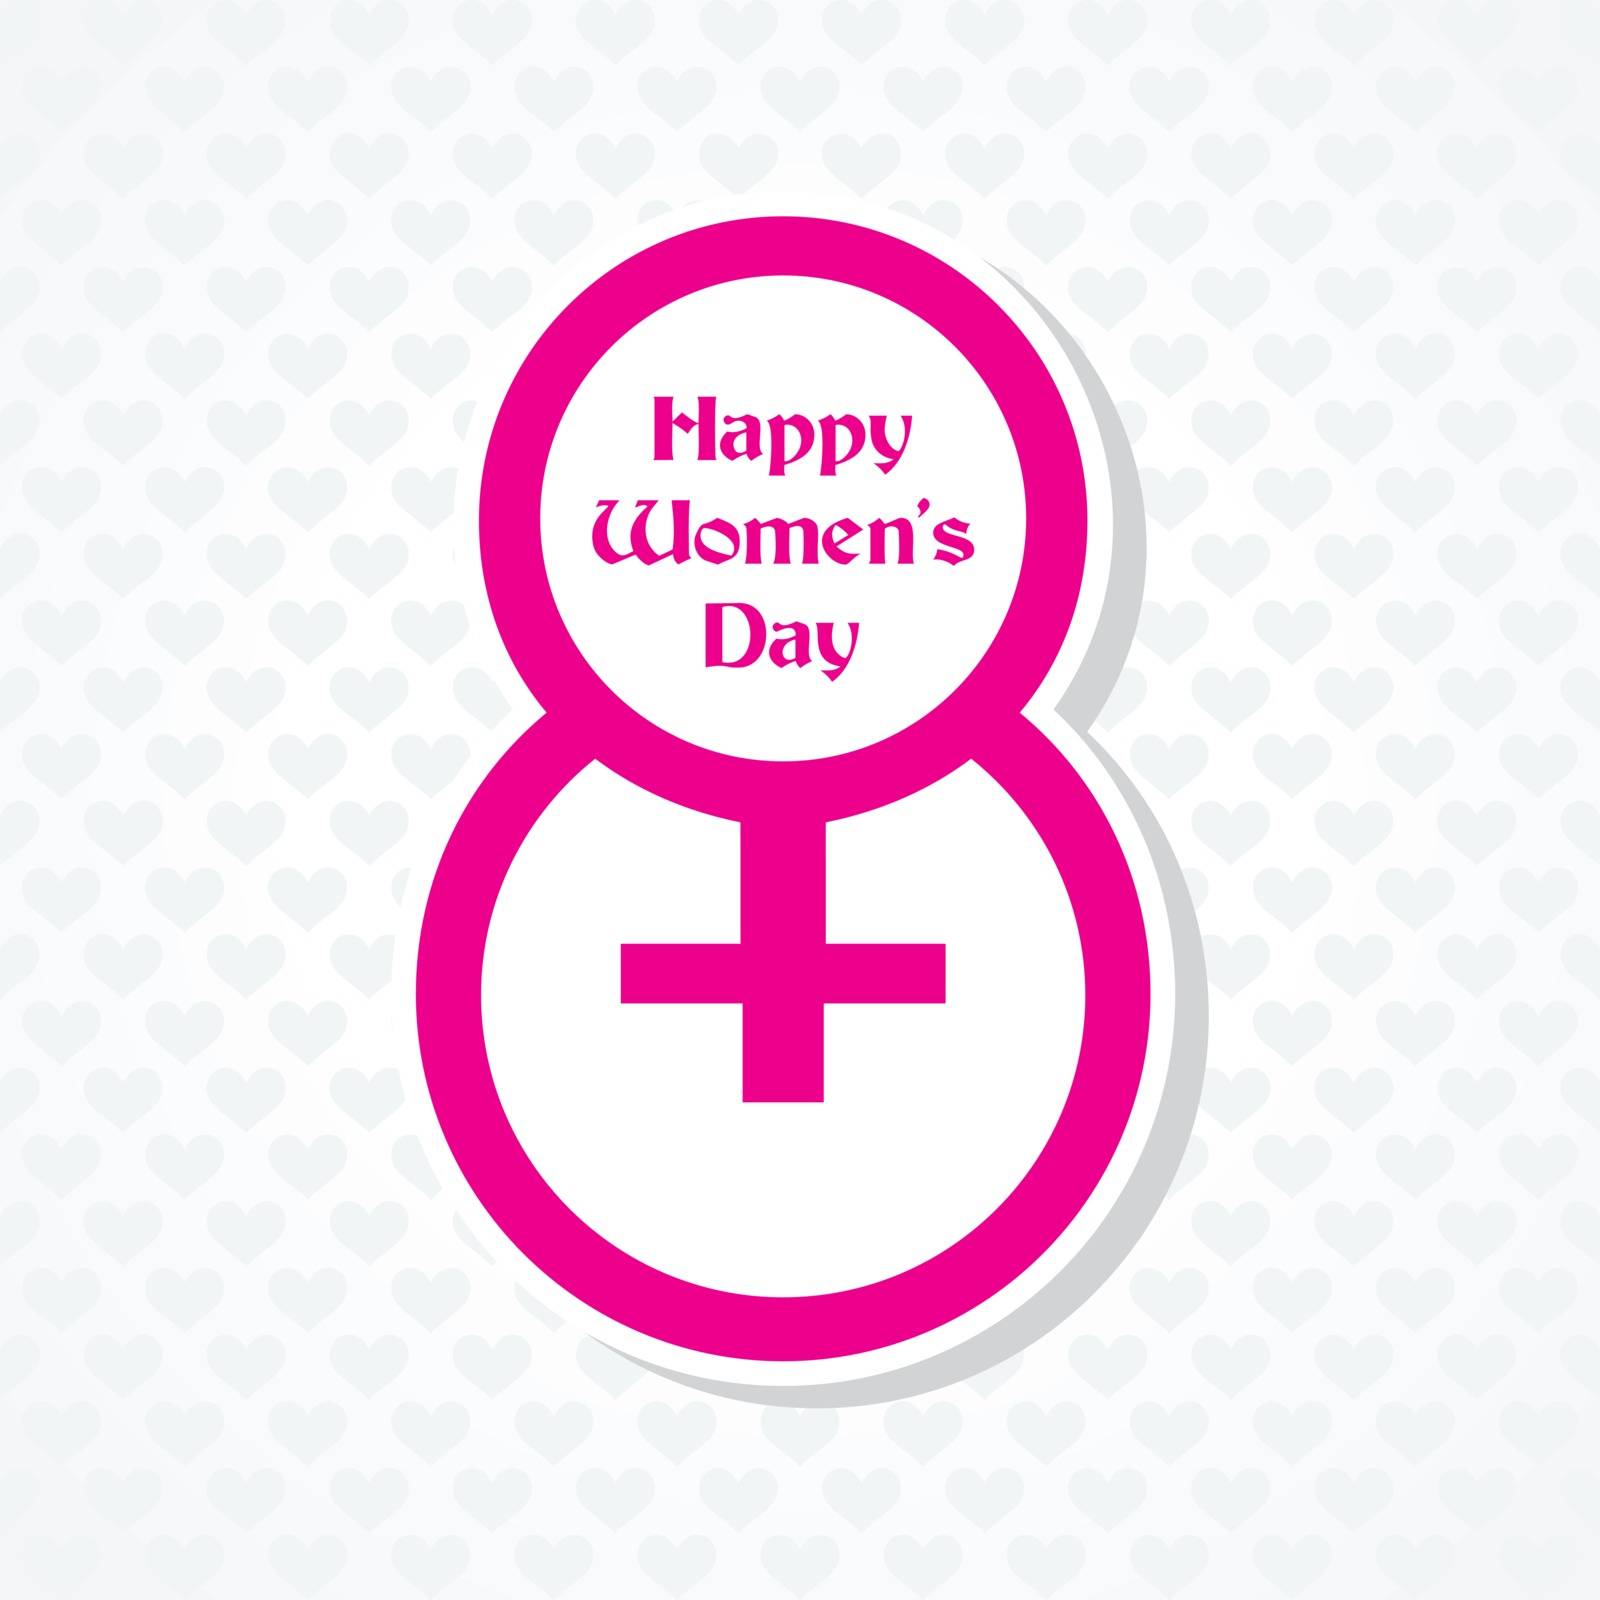 Womans day greeting stock vector